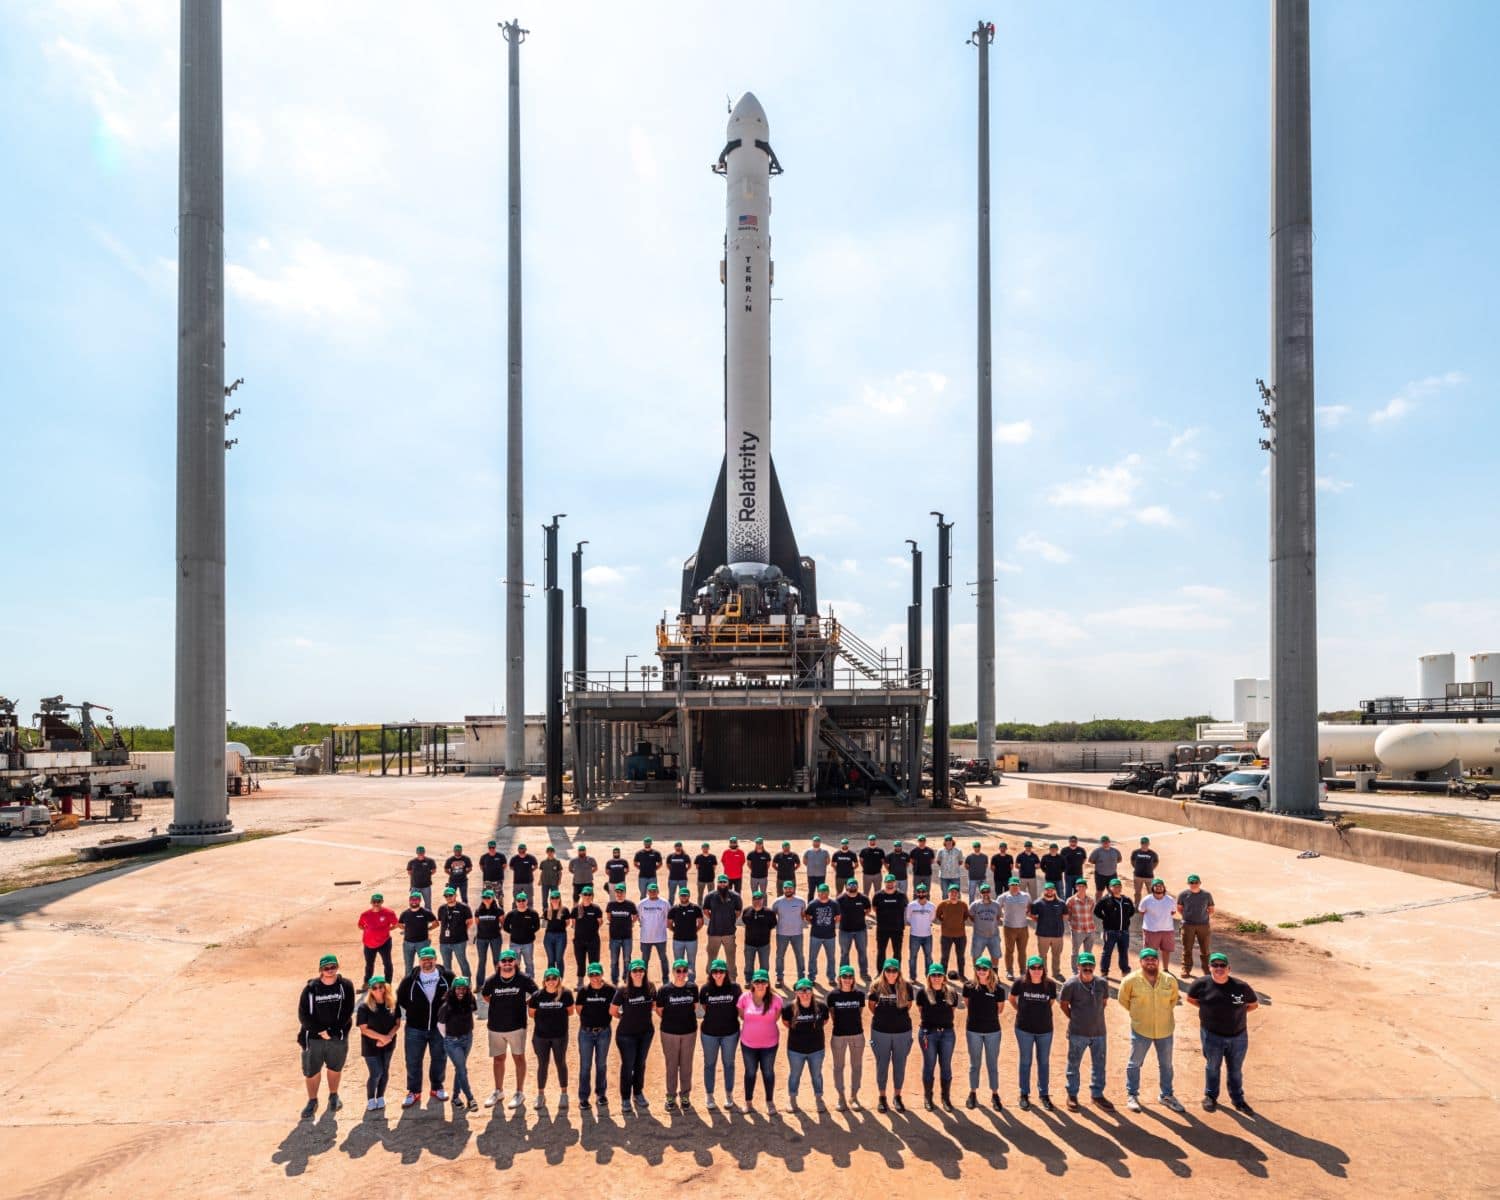 A wide shot of three rows of twenty people in bright green baseball caps, standing in front of a rocket on a launch pad.